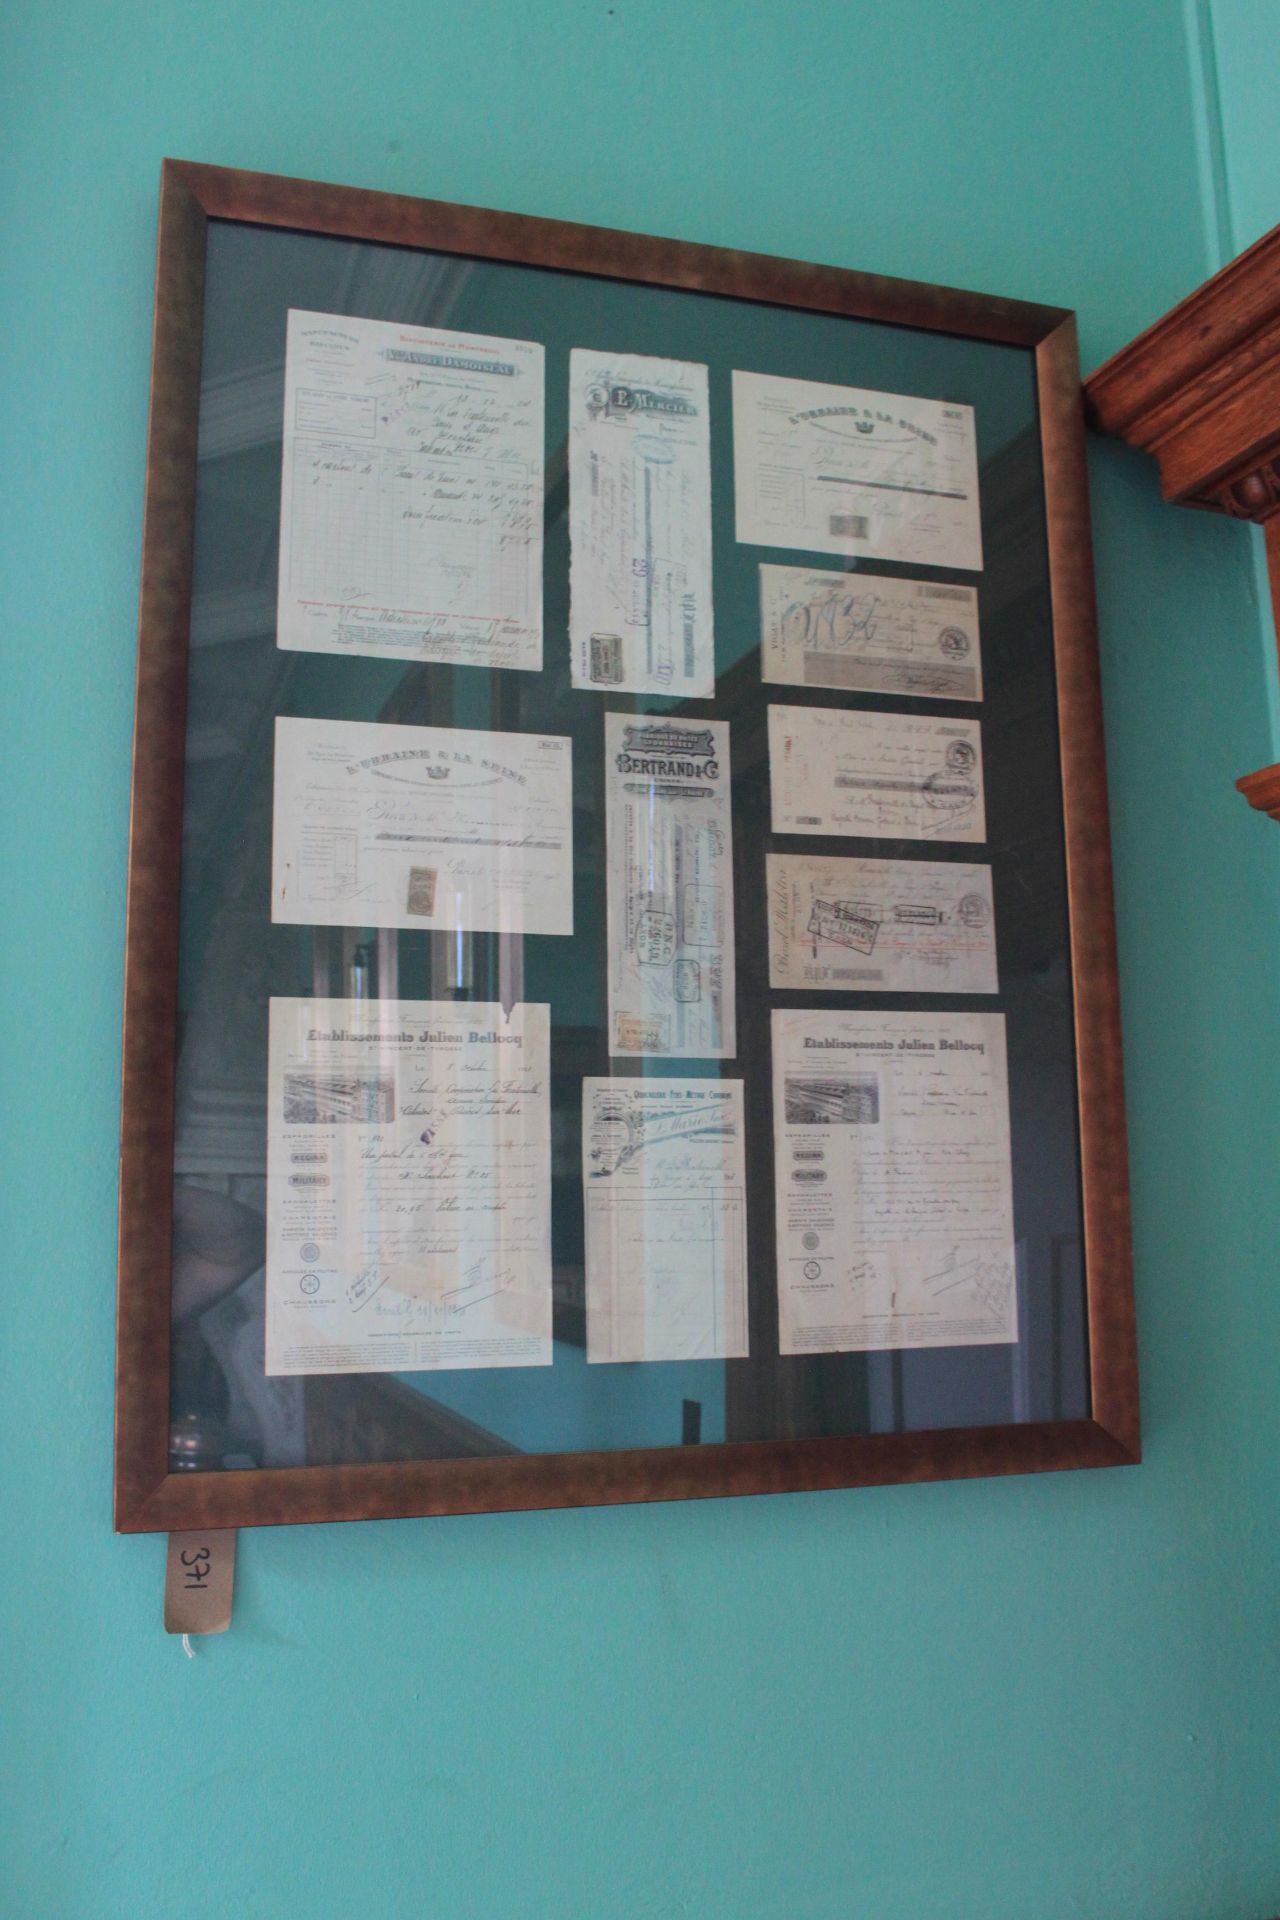 Vintage French Cafe Receipts Curated And Presented In A Copper Frame 810 x 1020mm